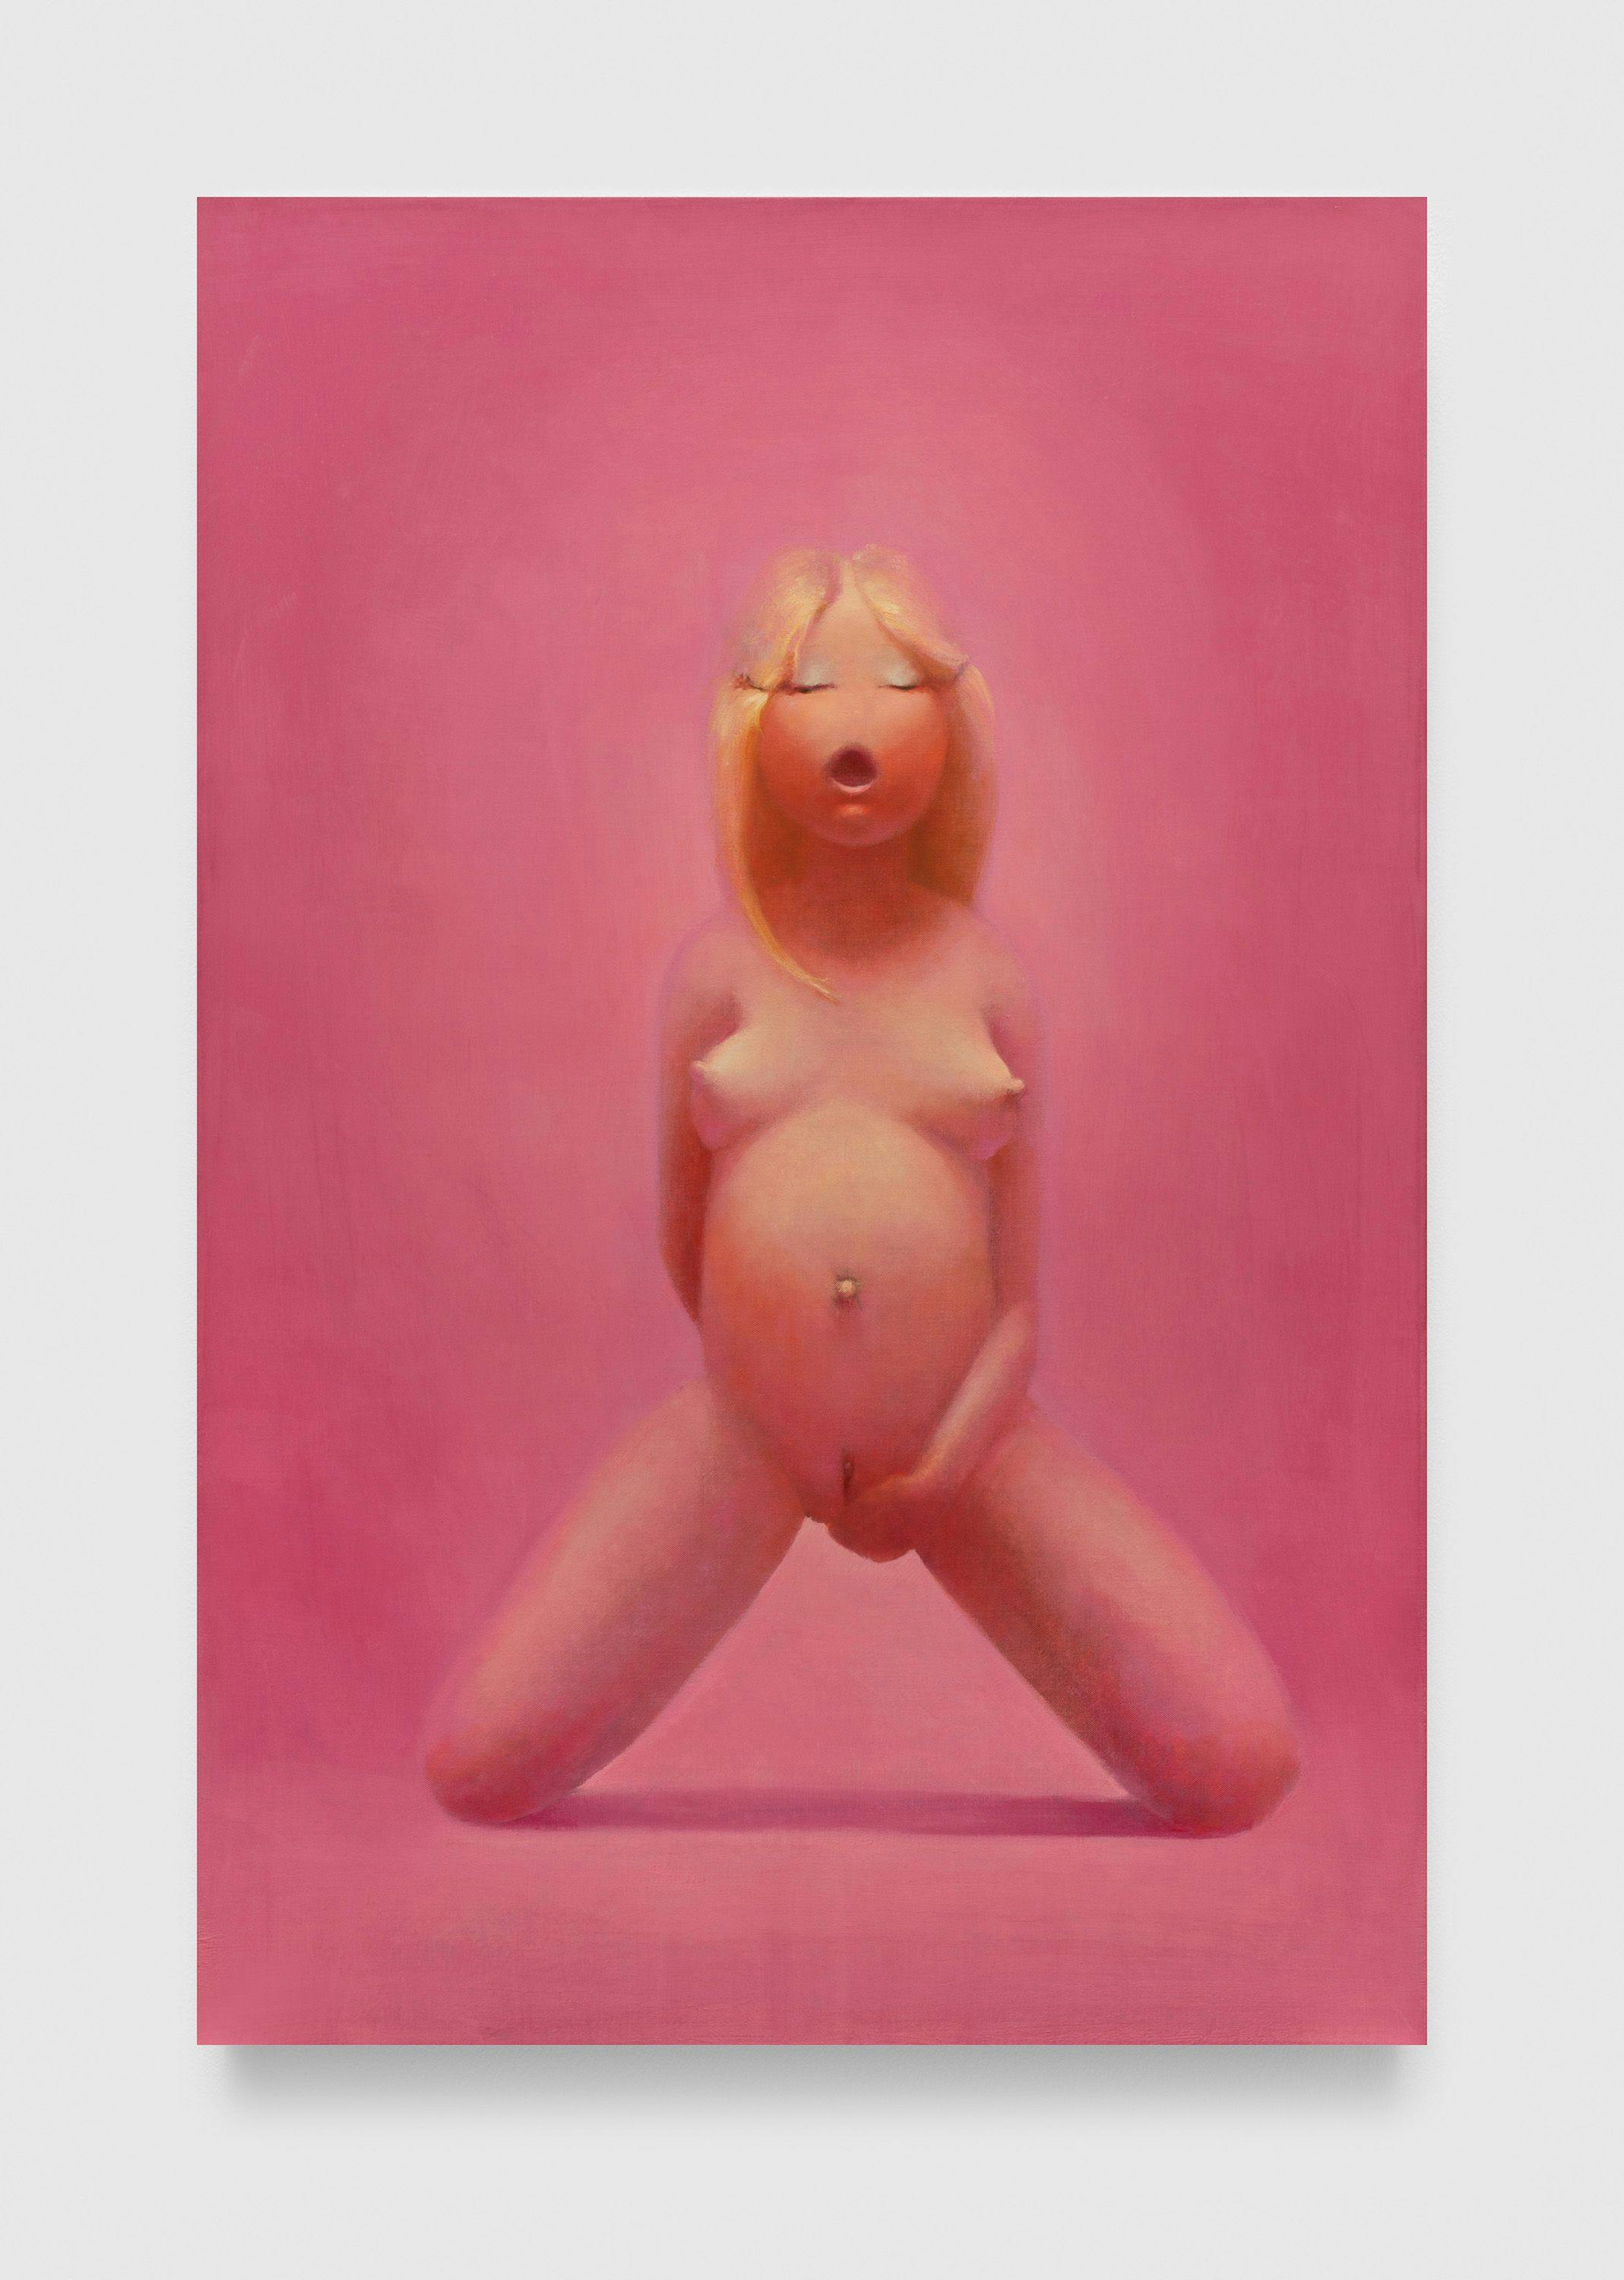 A painting by Lisa Yuskavage, titled Big Blonde Jerking Off, dated 1995.